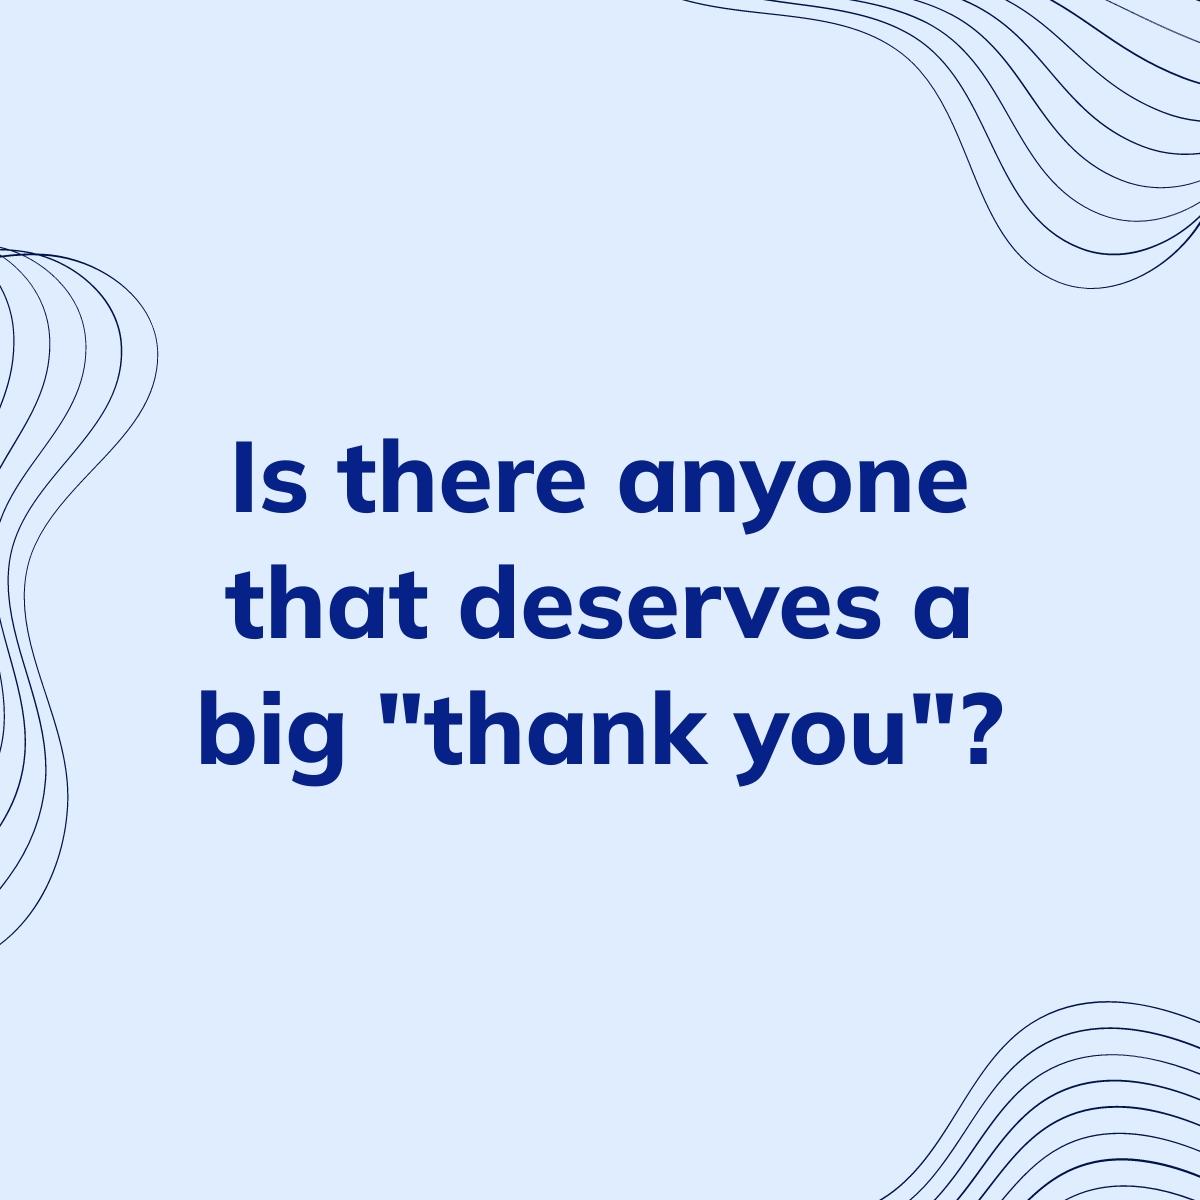 Journal Prompt: Is there anyone that deserves a big "thank you"?